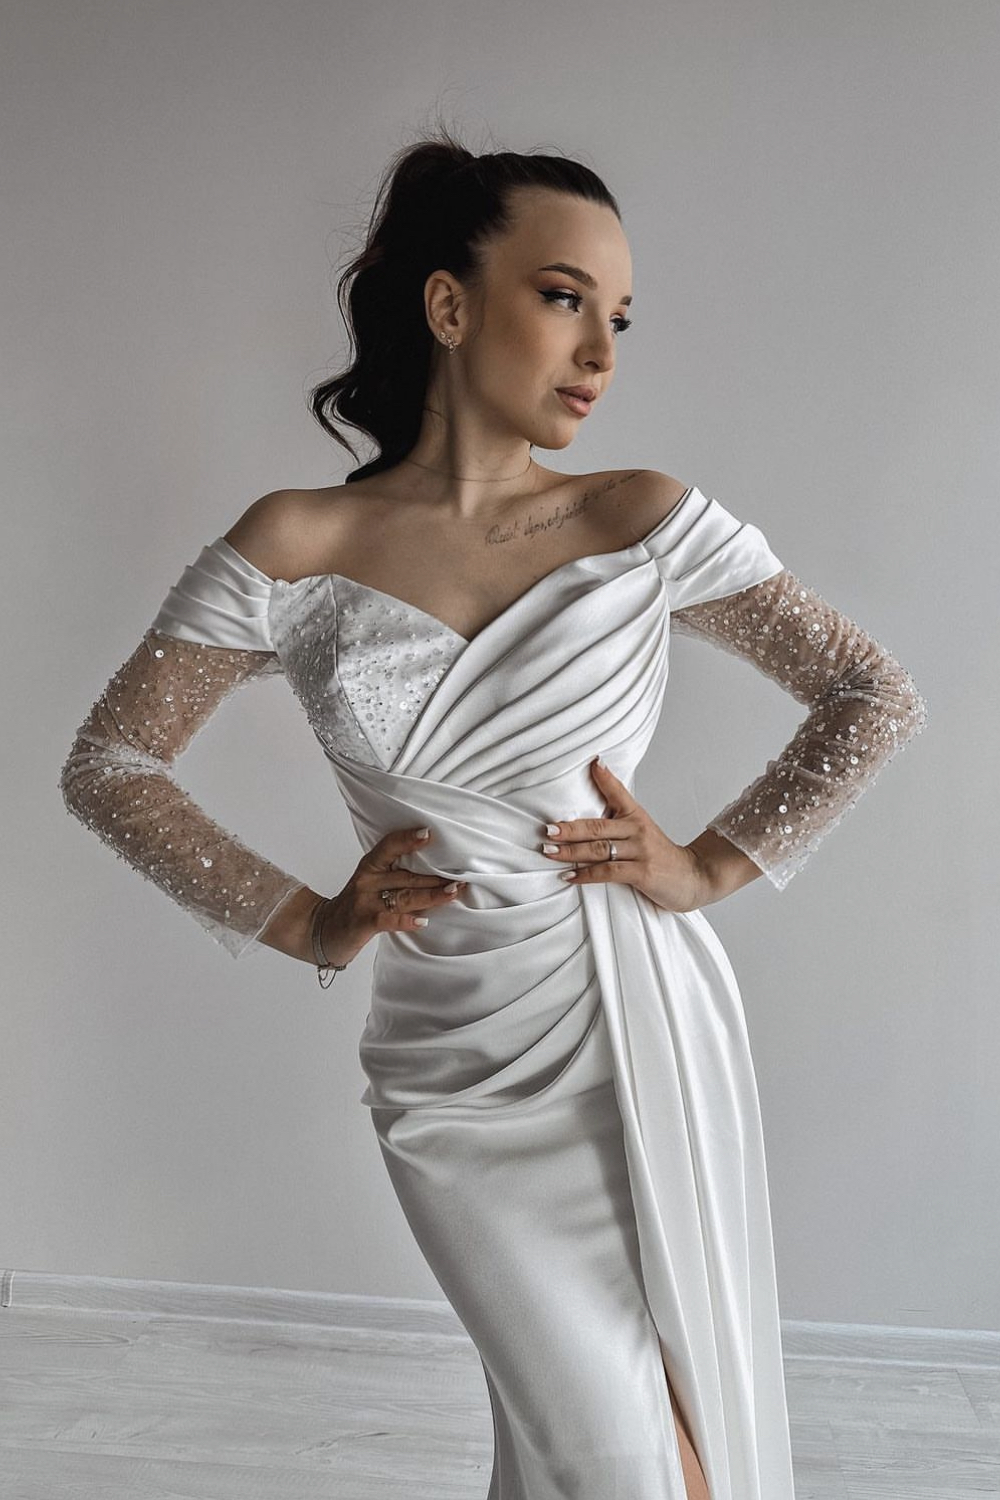 off-the-shoulder-goddess-wedding-dress-with-beaded-sheer-sleeves-1